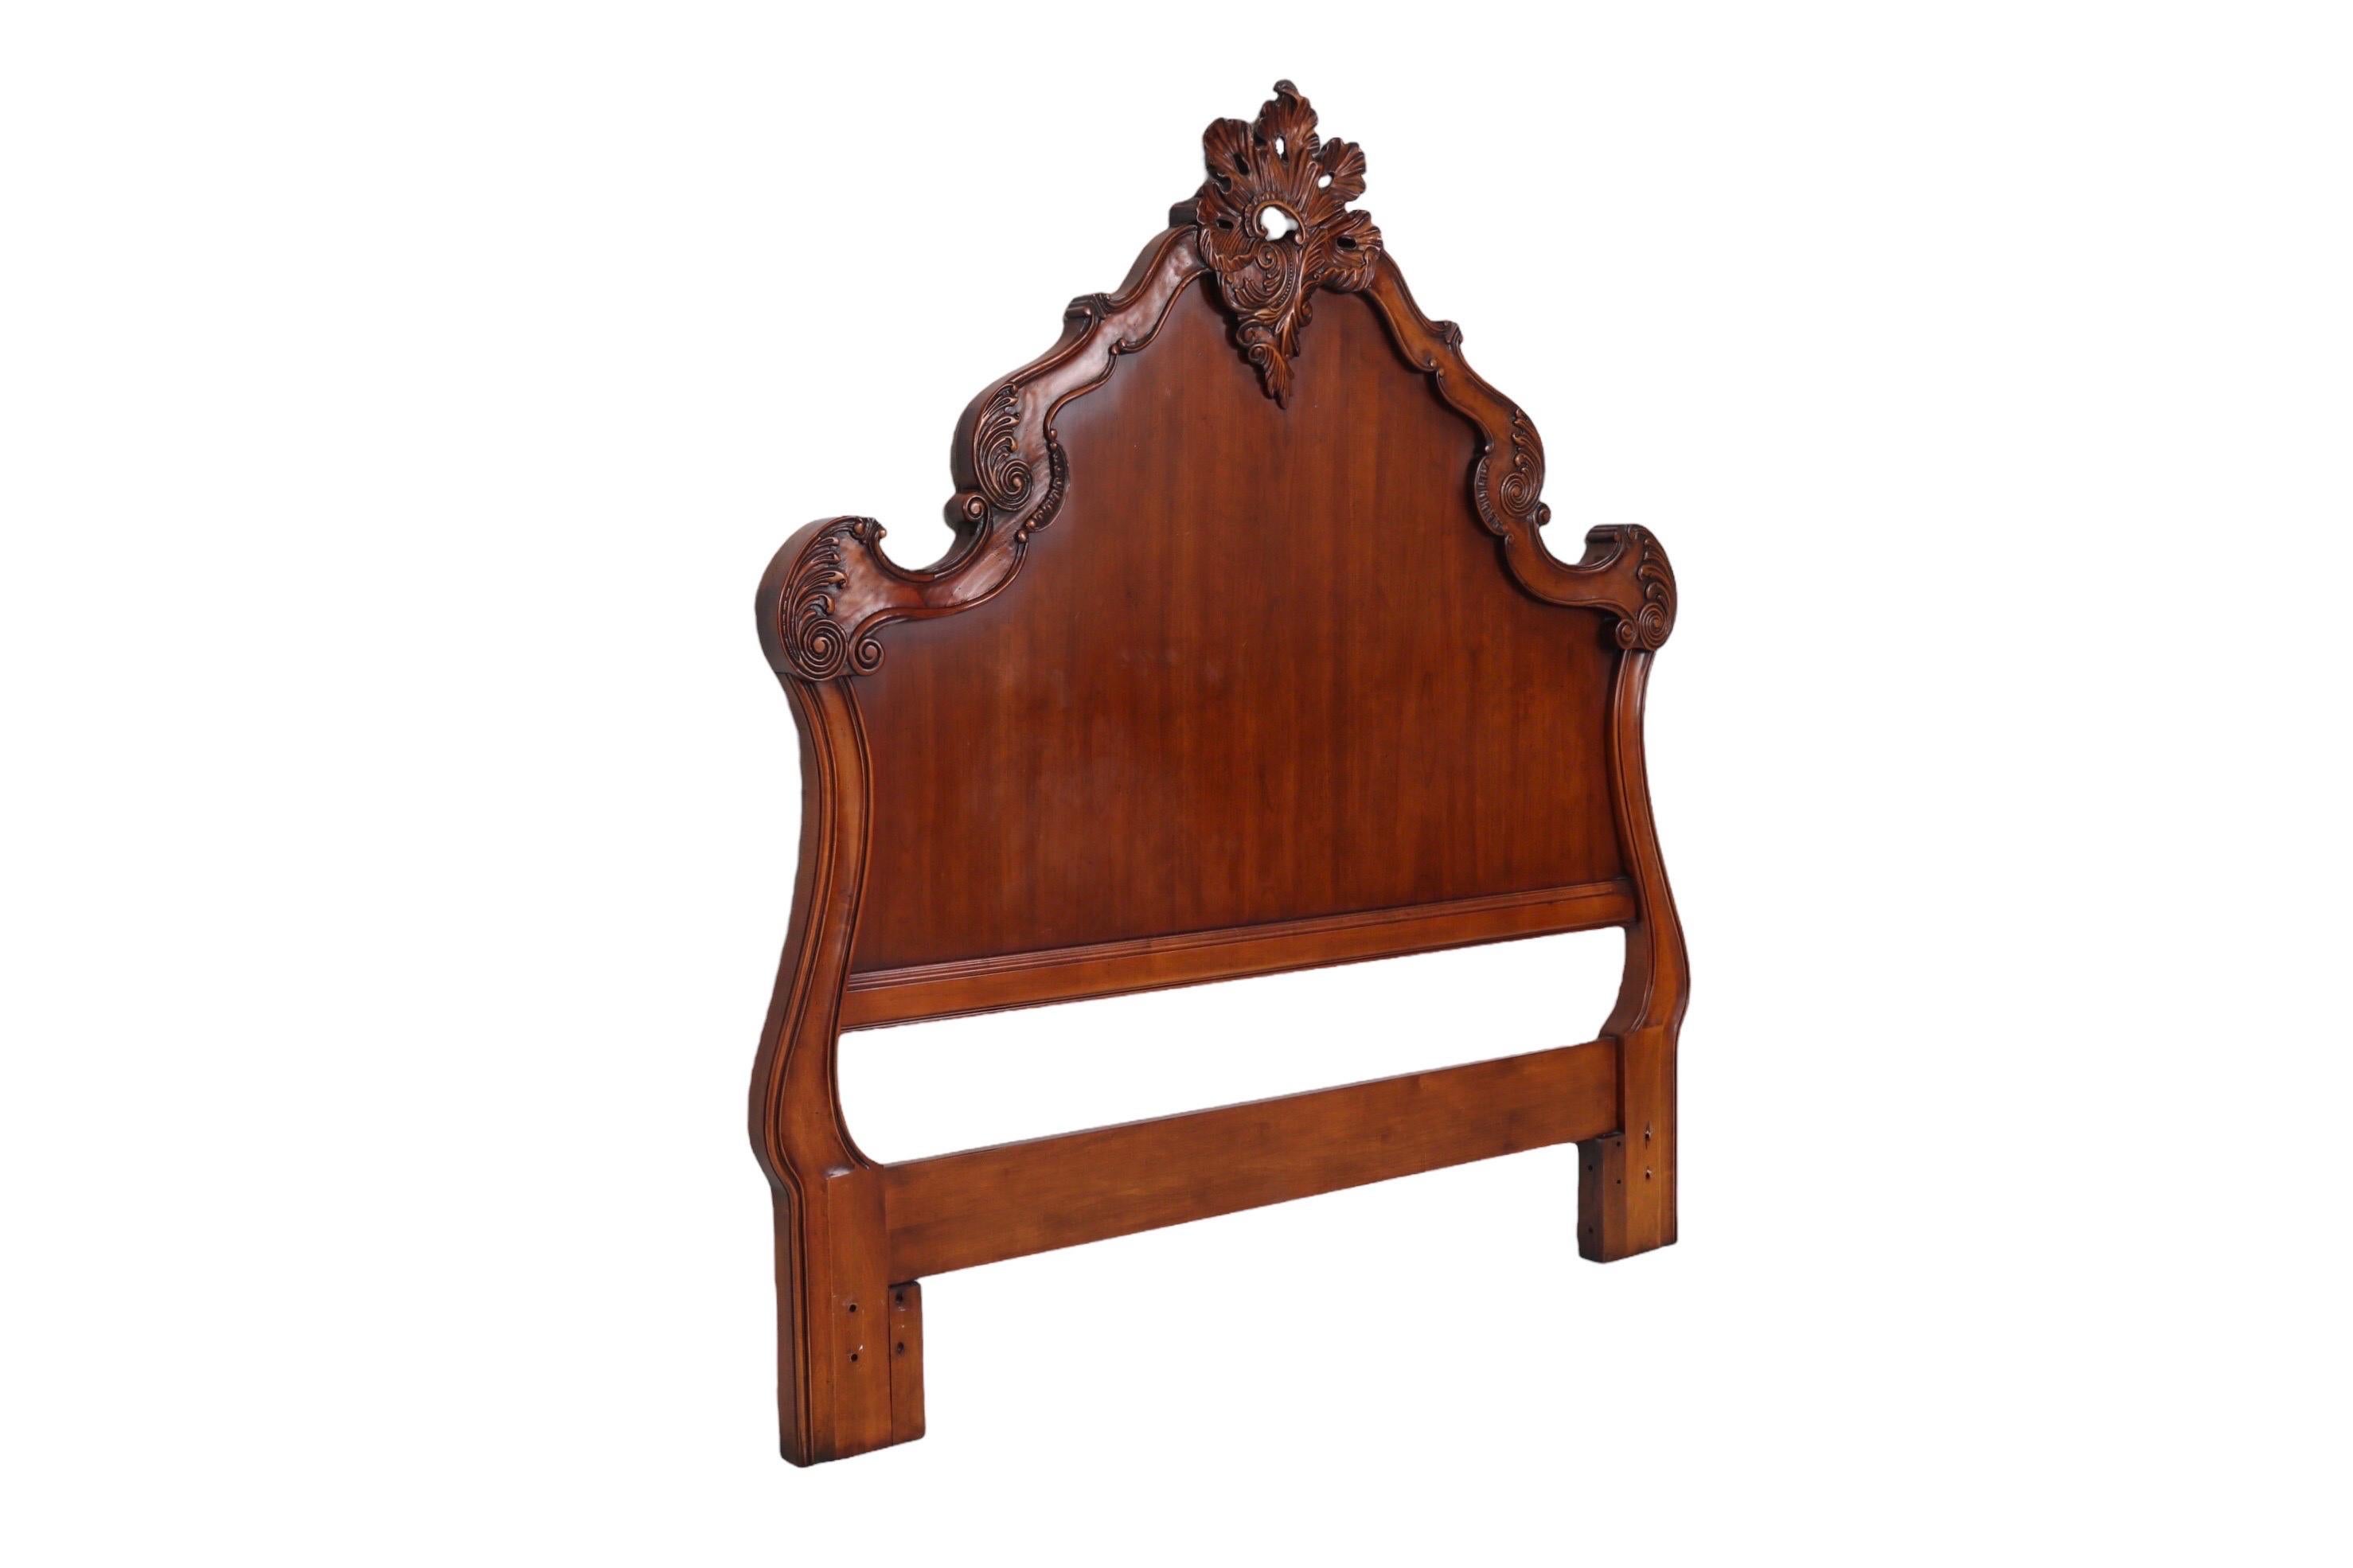 A Rococo style carved queen size headboard made of walnut. The thick undulating crest rail is beveled with a profusion of asymmetrical scrollwork and a large pierced rocaille ornamentation at the center.
 